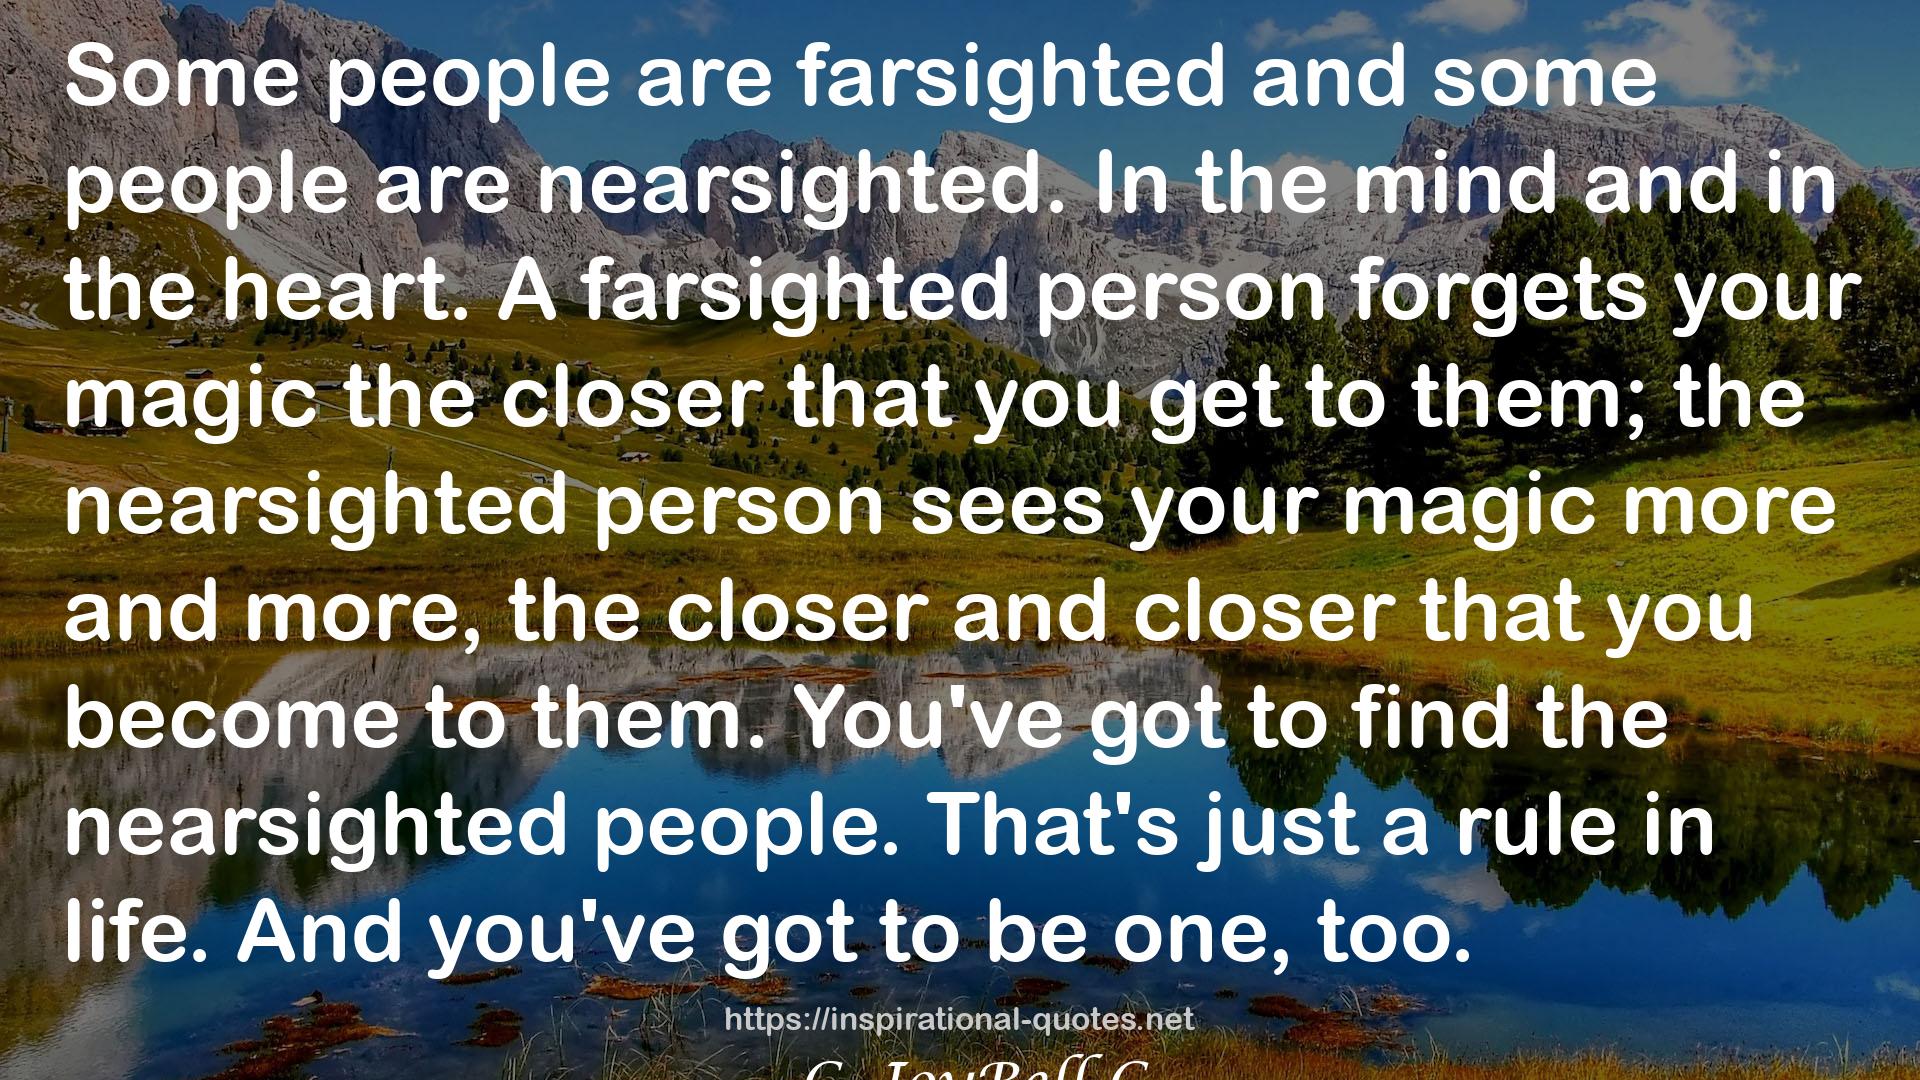 A farsighted person  QUOTES